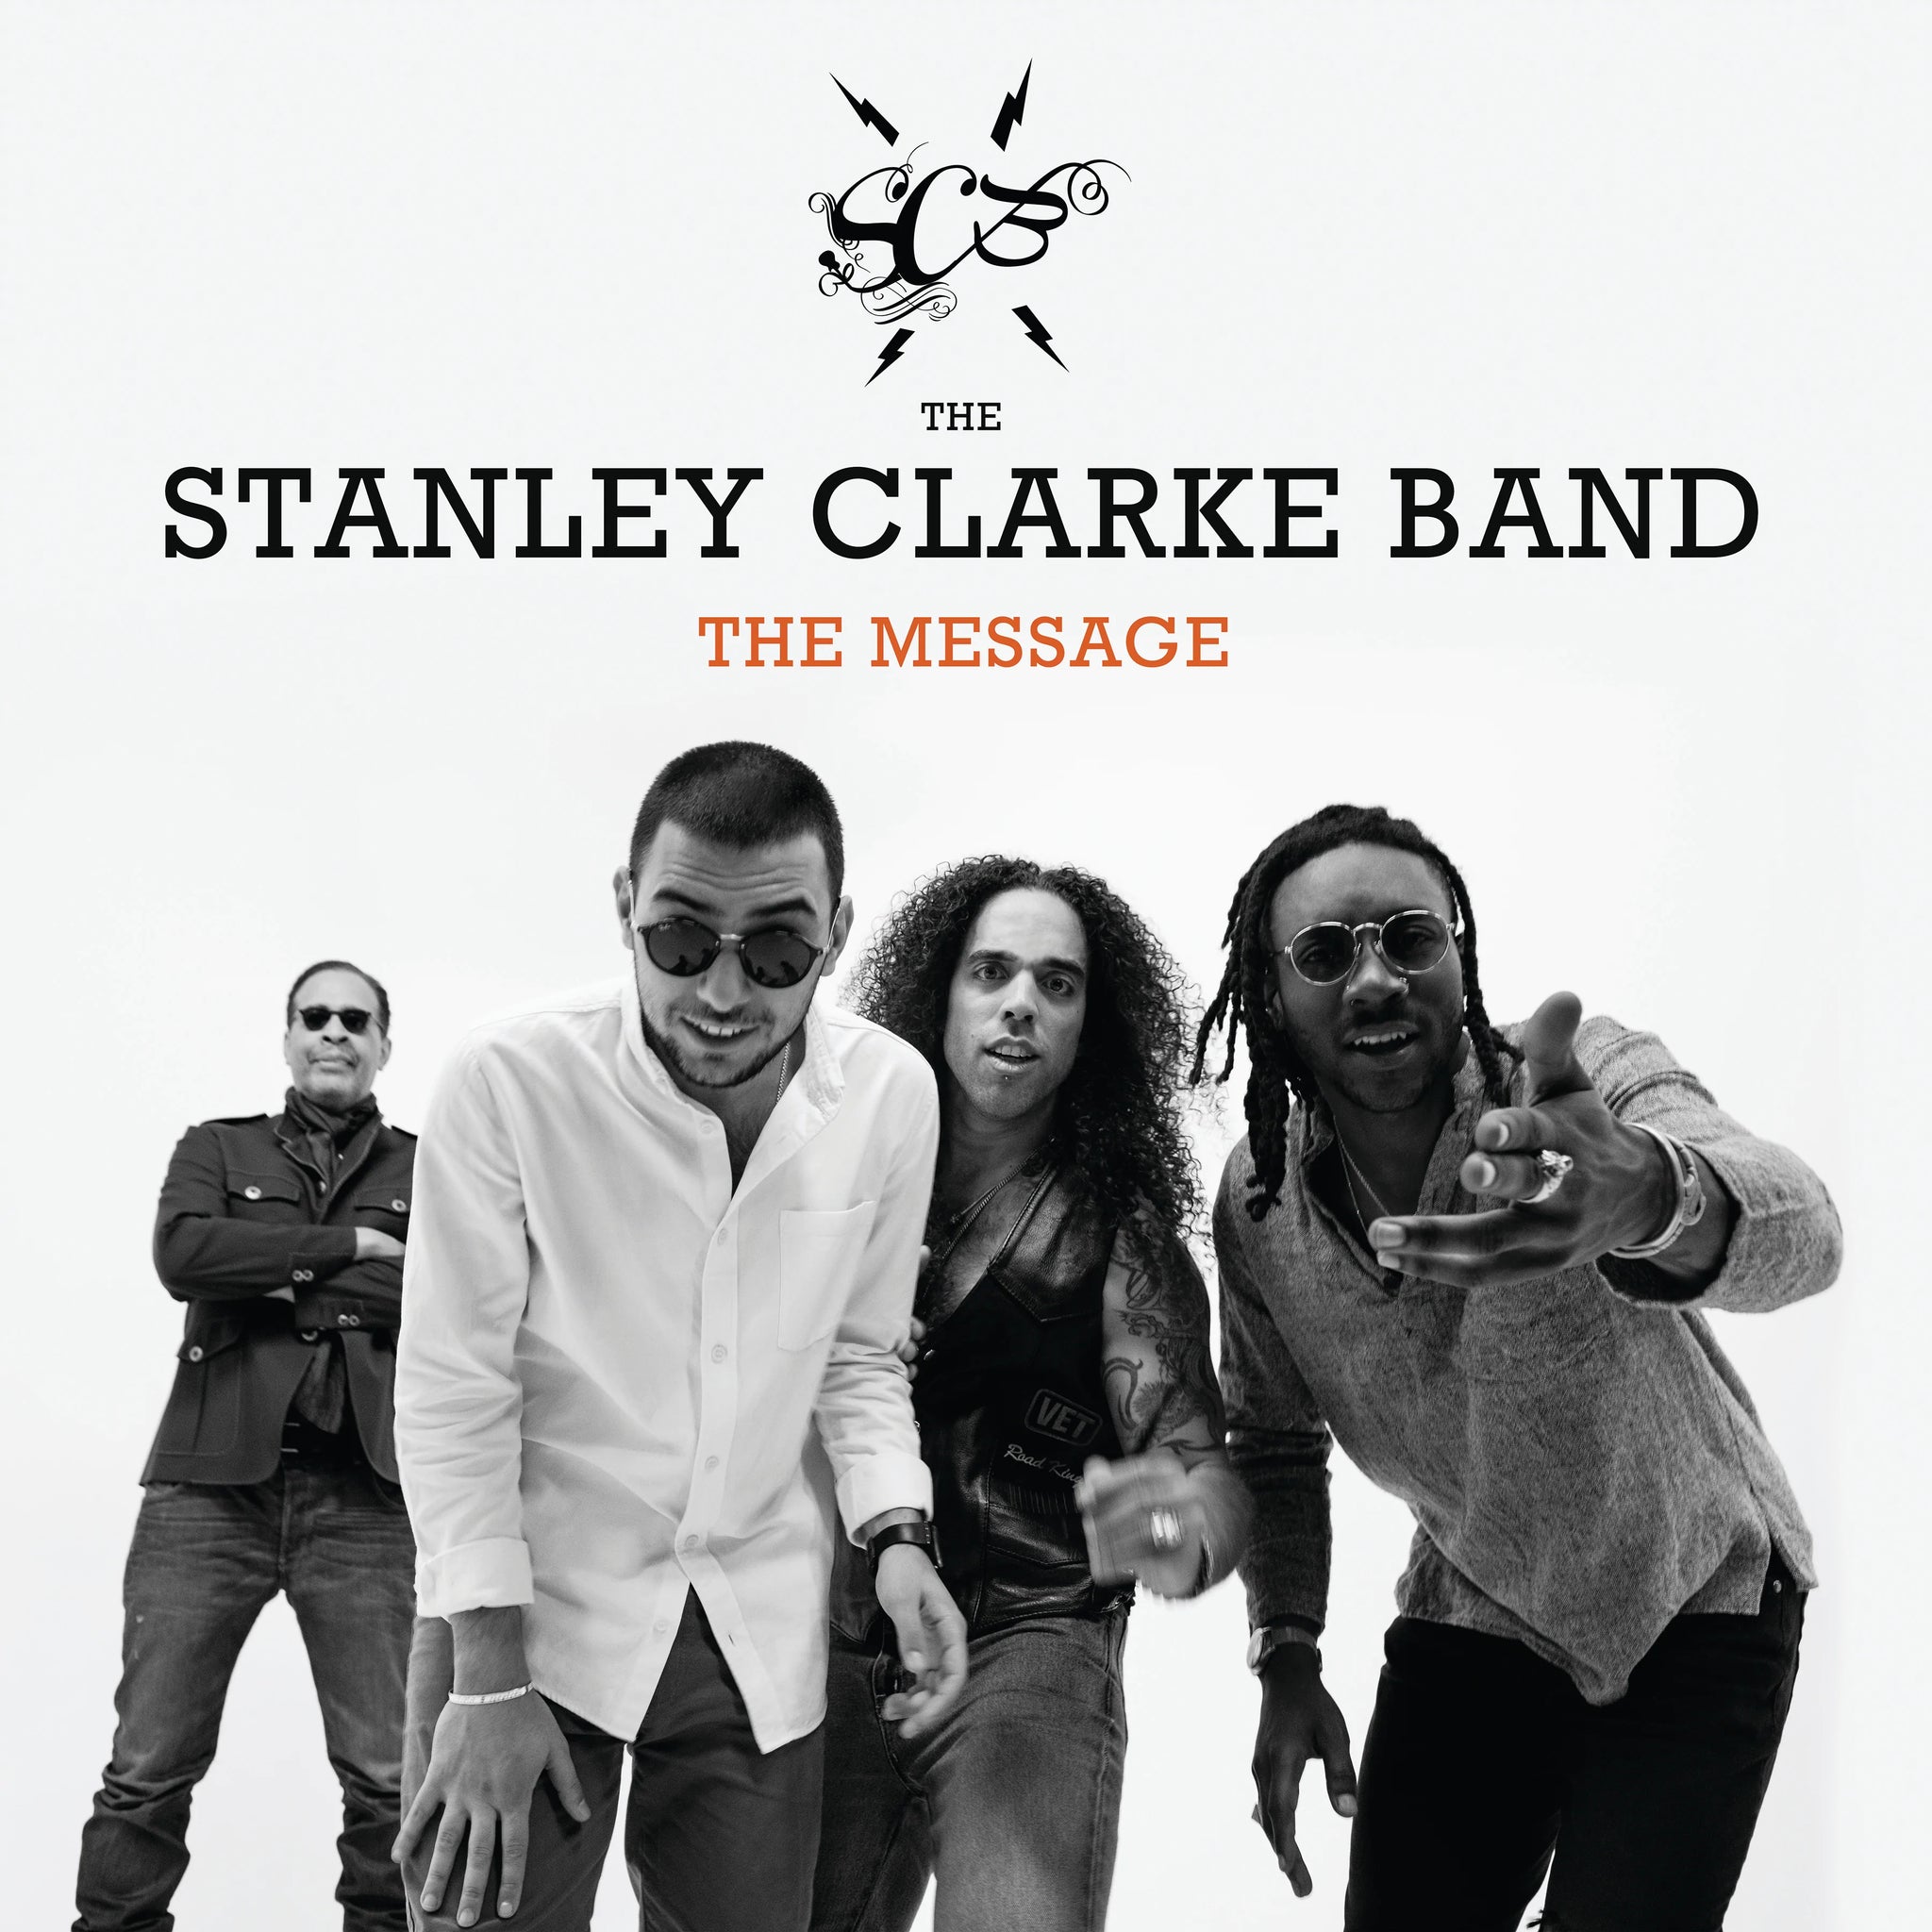 The Stanley Clarke Band - The Message